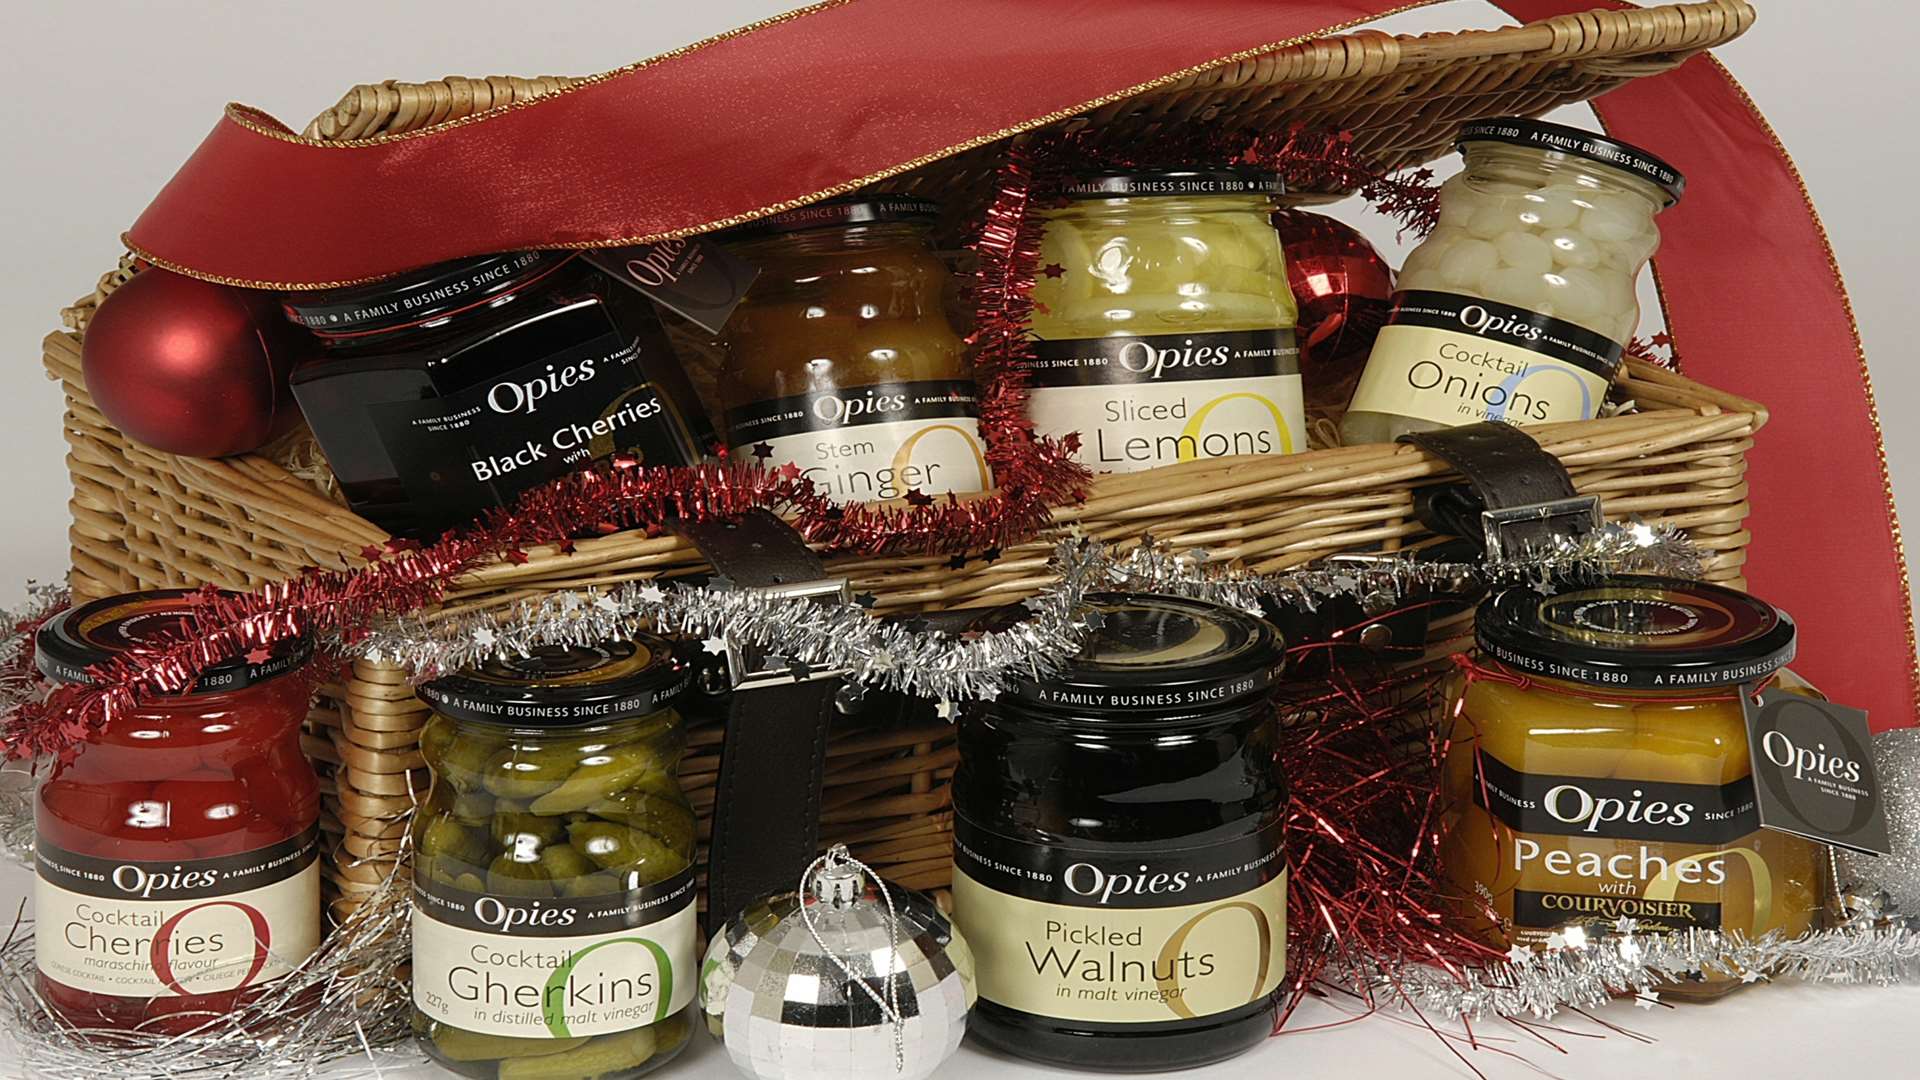 Bennett Opie supplies a variety of pickles and sauces